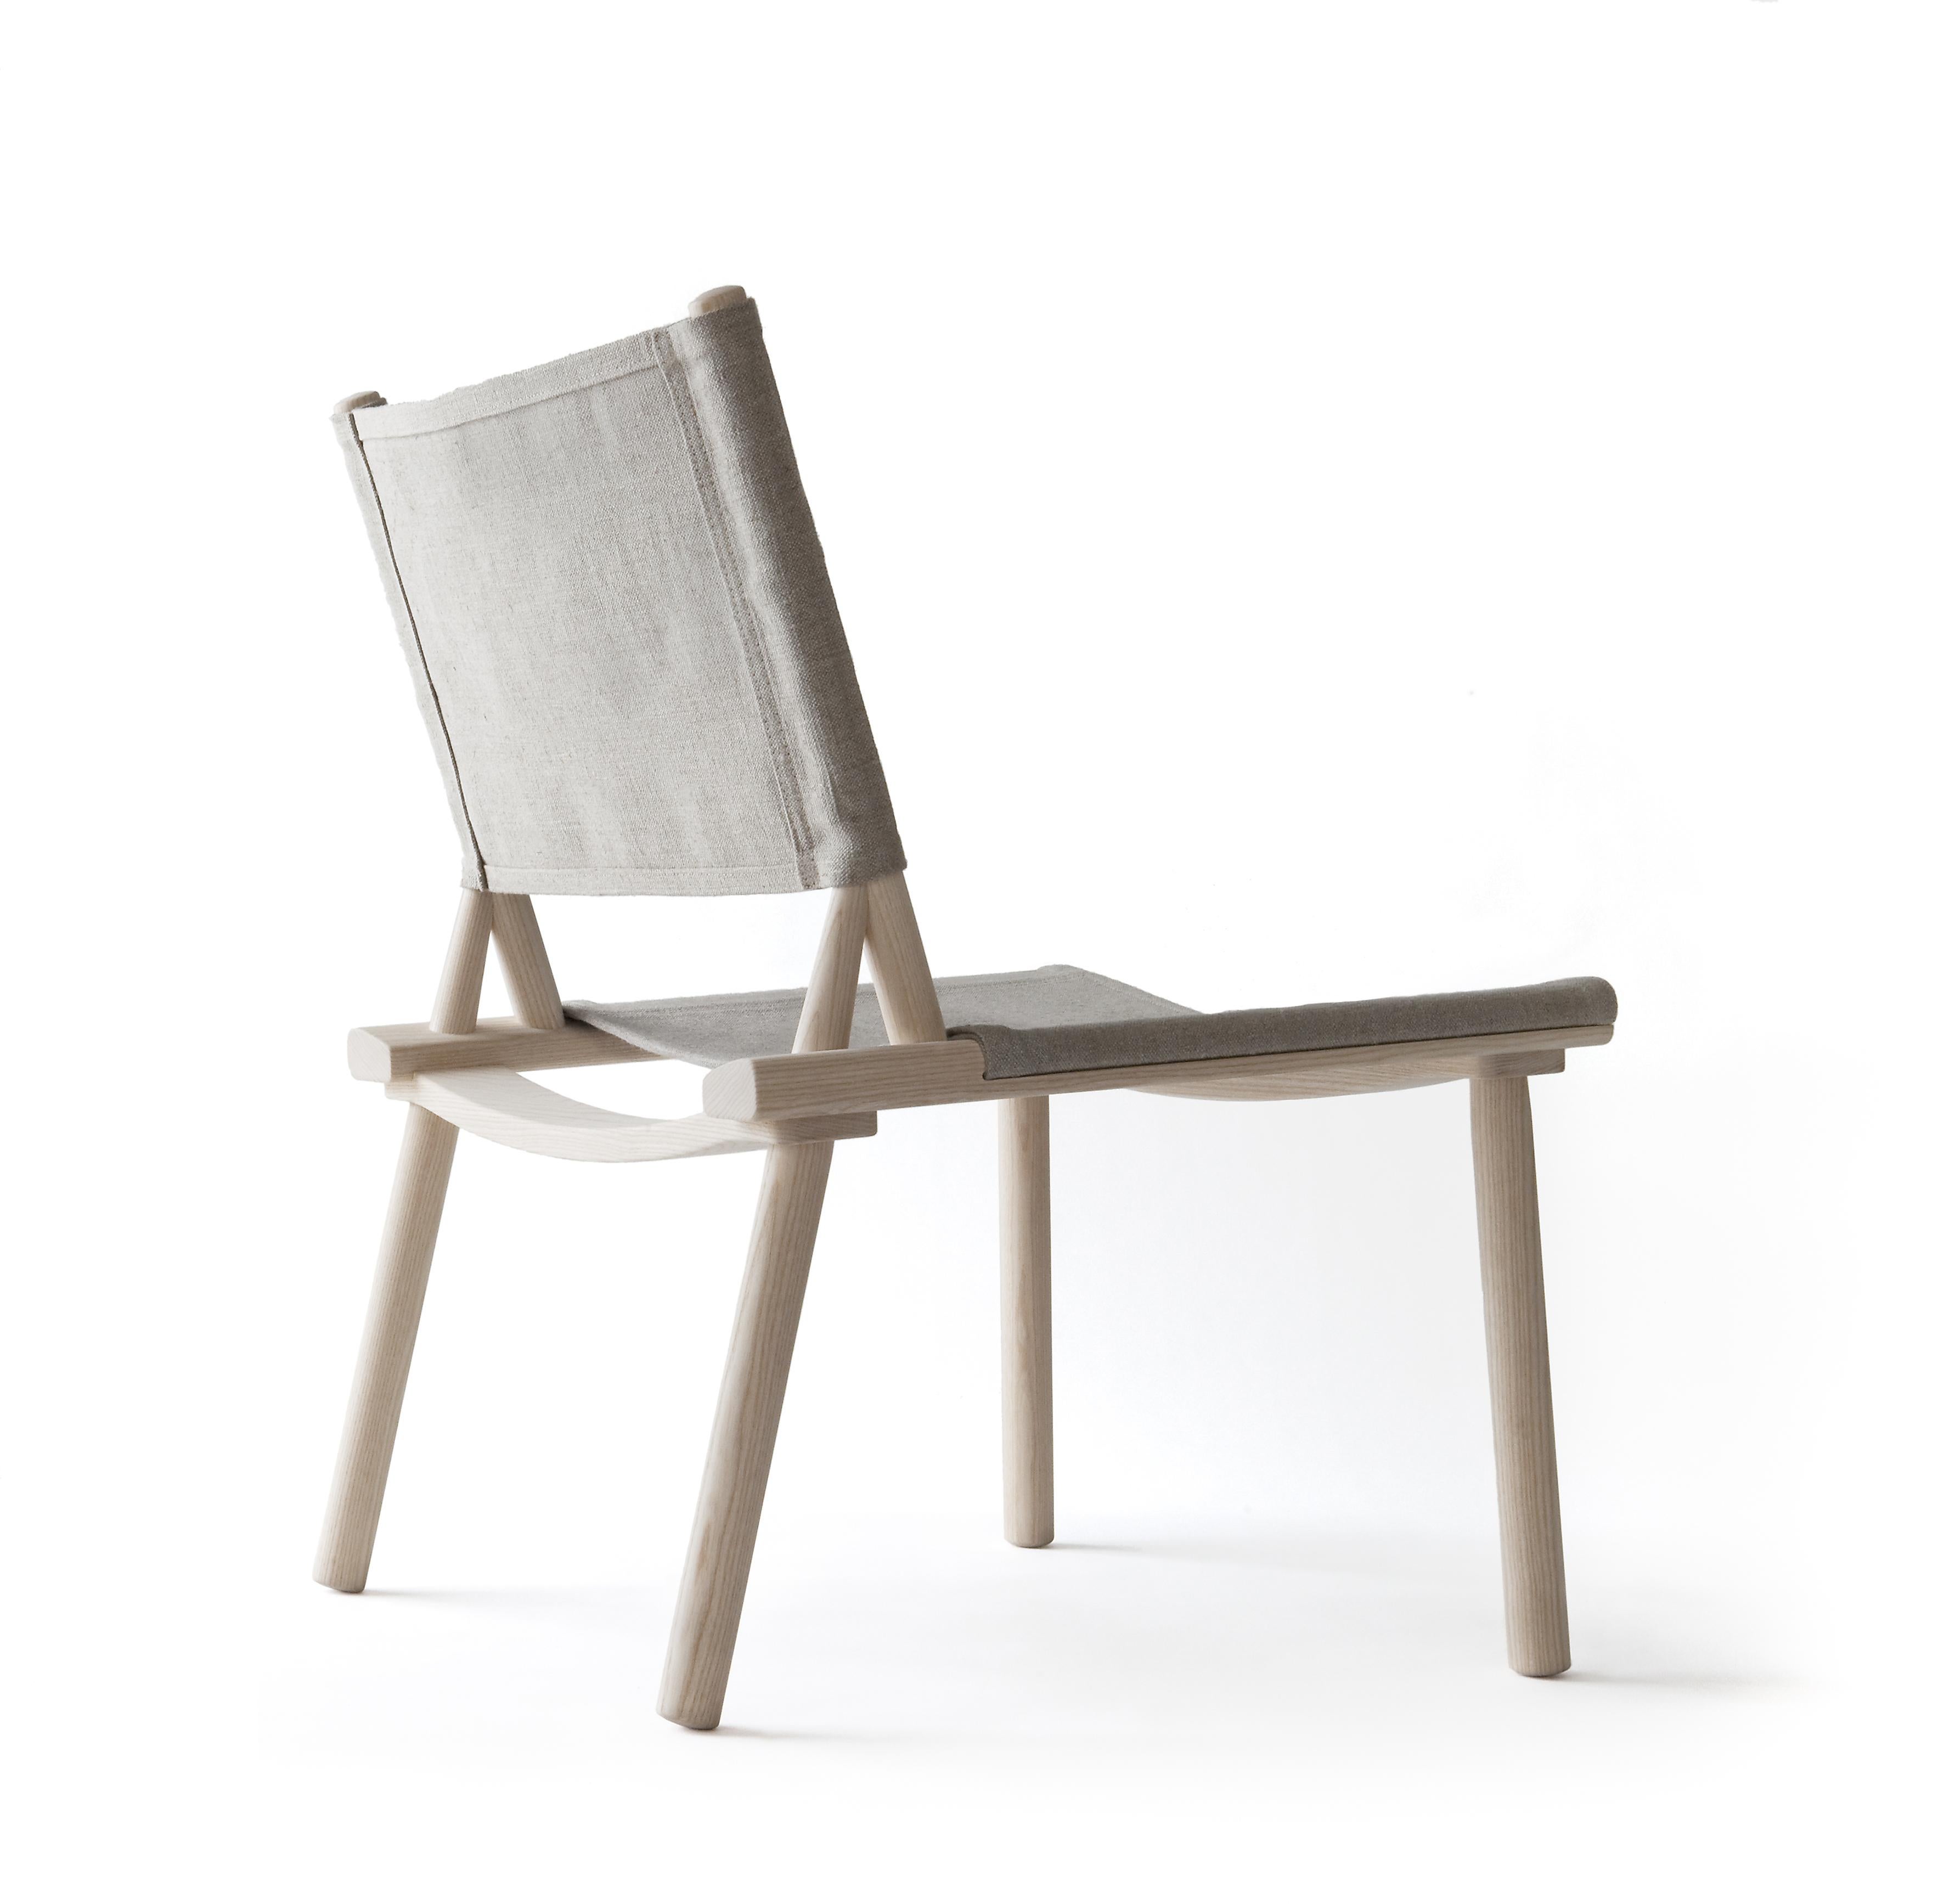 December chair is designed by Jasper Morrison and Wataru Kumano, 2012. The chair is light and comfortable, and thanks to its simple Nordic design it suits both modern and traditional interiors.
Available in ash or oak frame with linen canvas